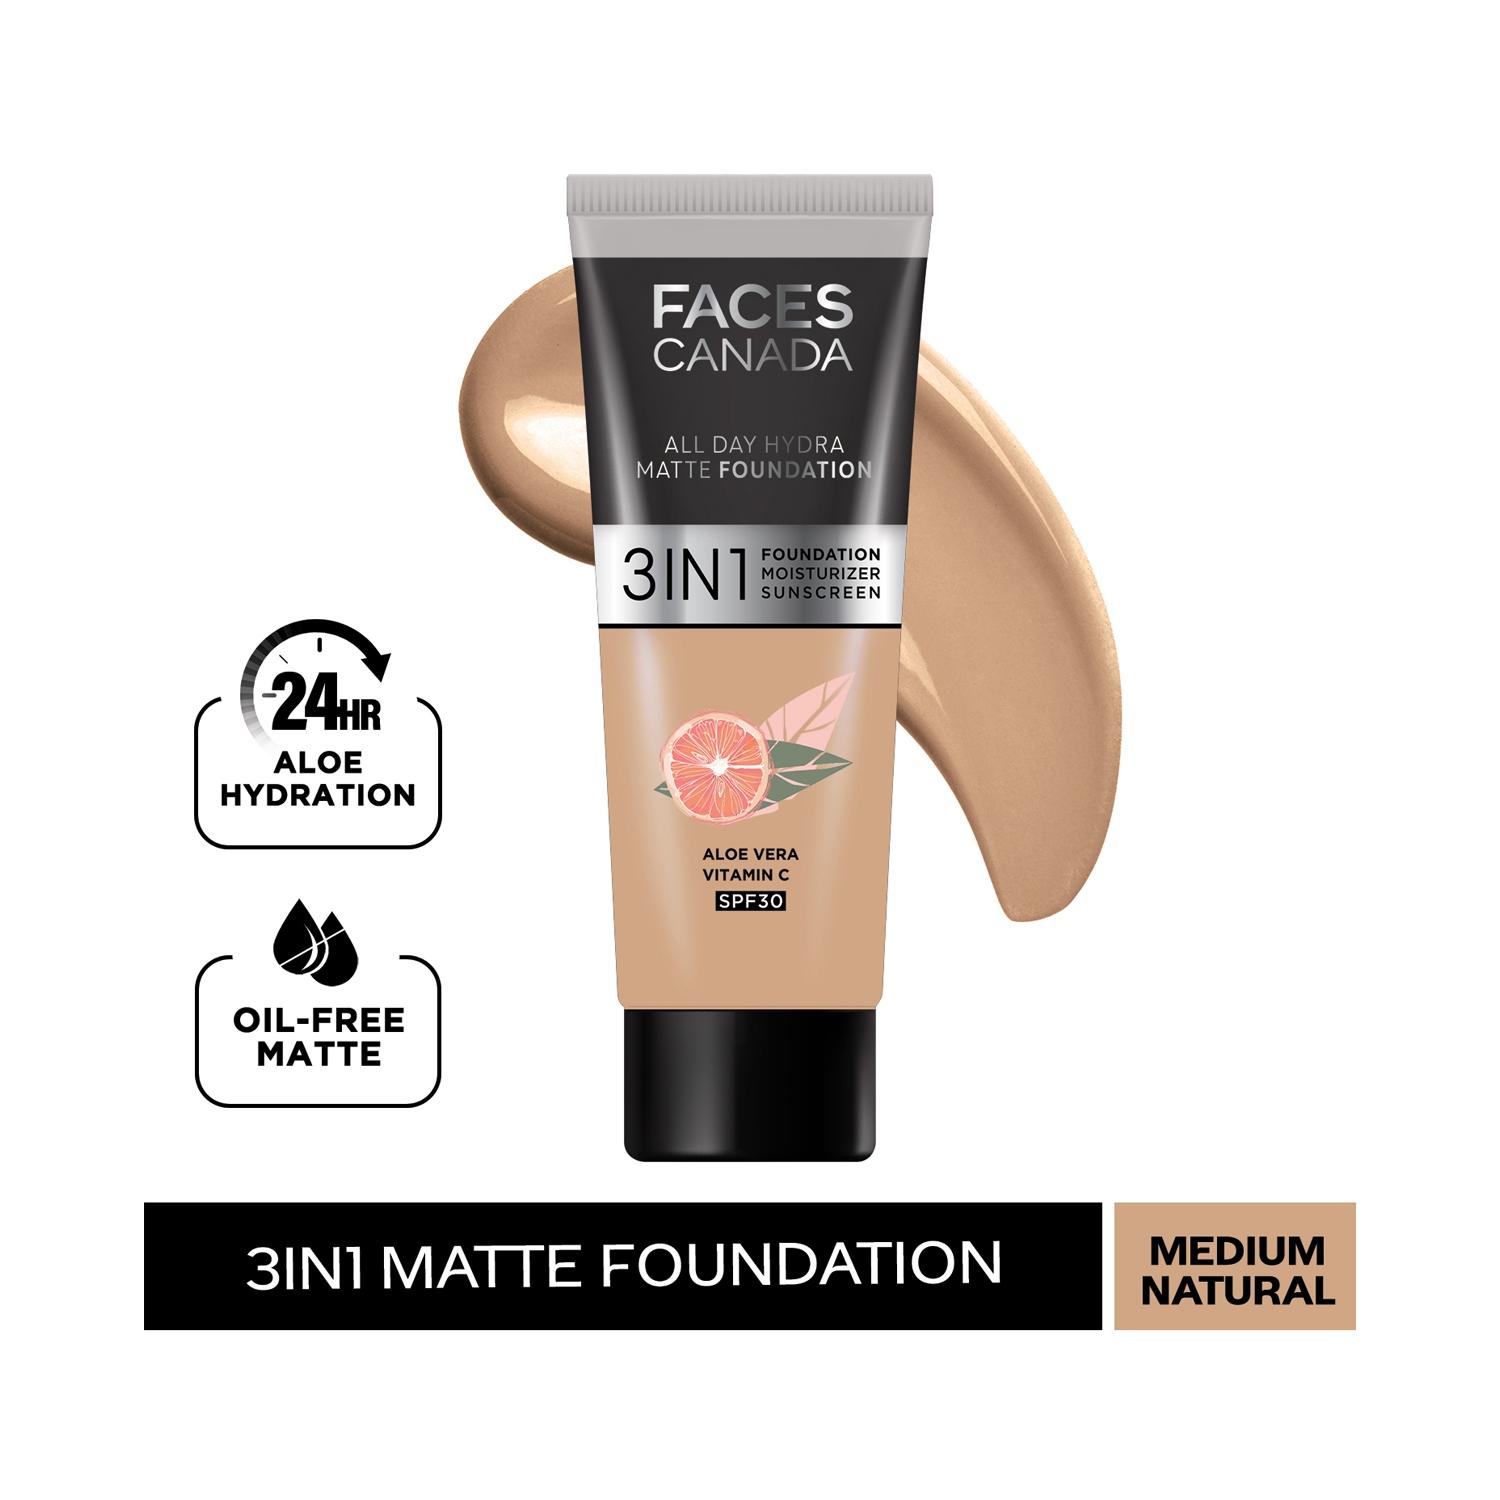 faces canada 3-in-1 all day hydra matte foundation - 022 medium natural (15ml)